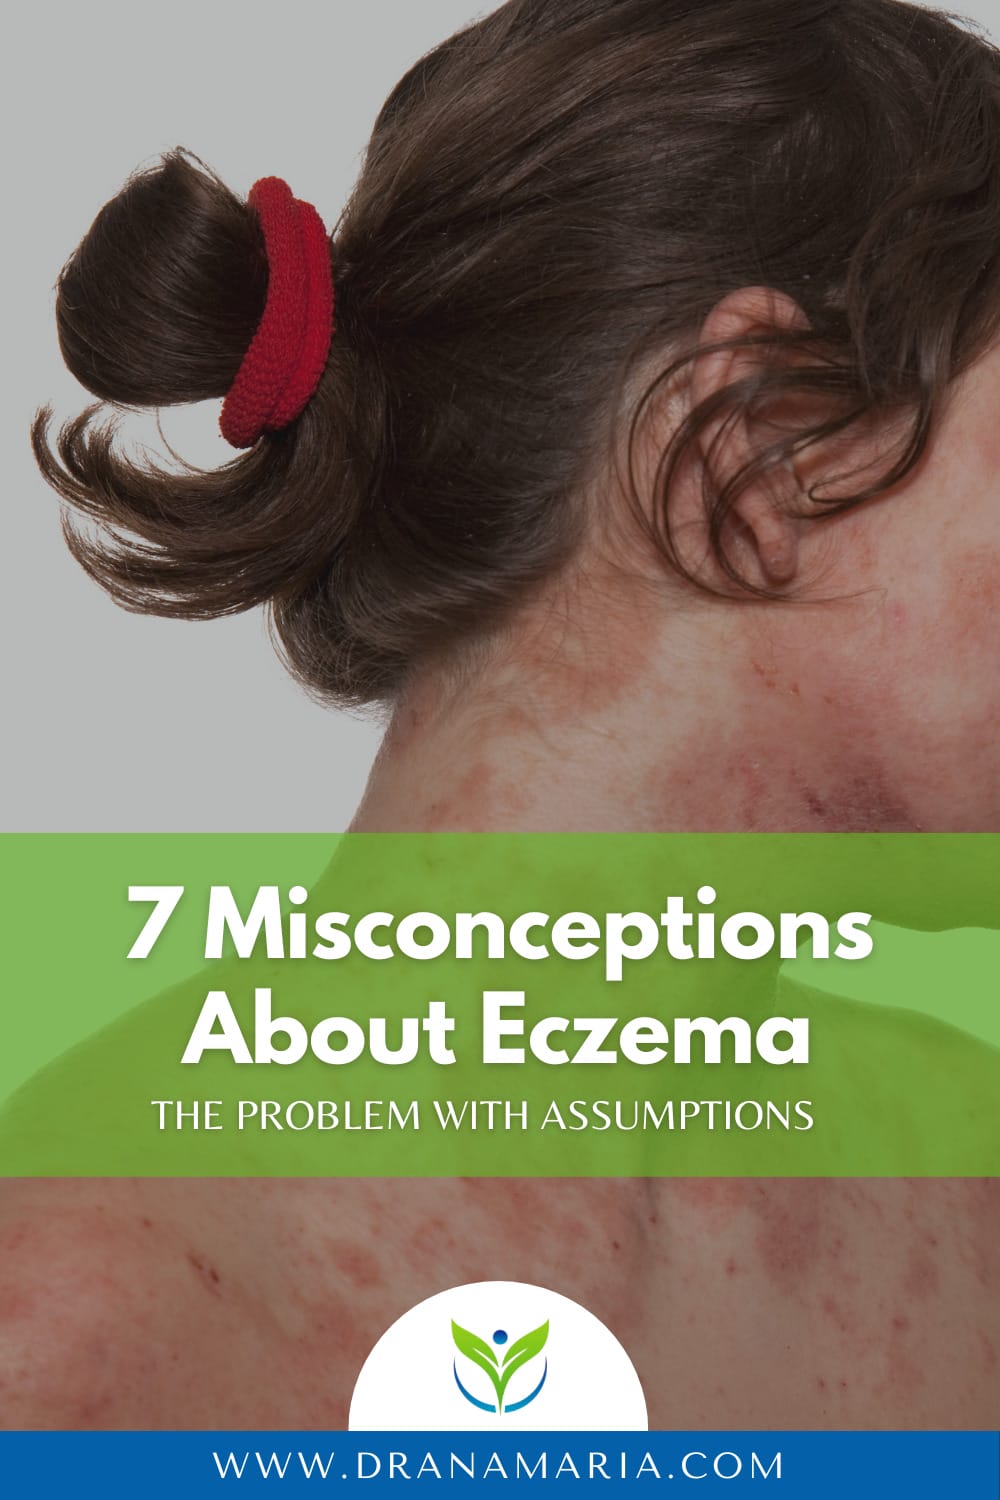 7 Misconceptions About Eczema